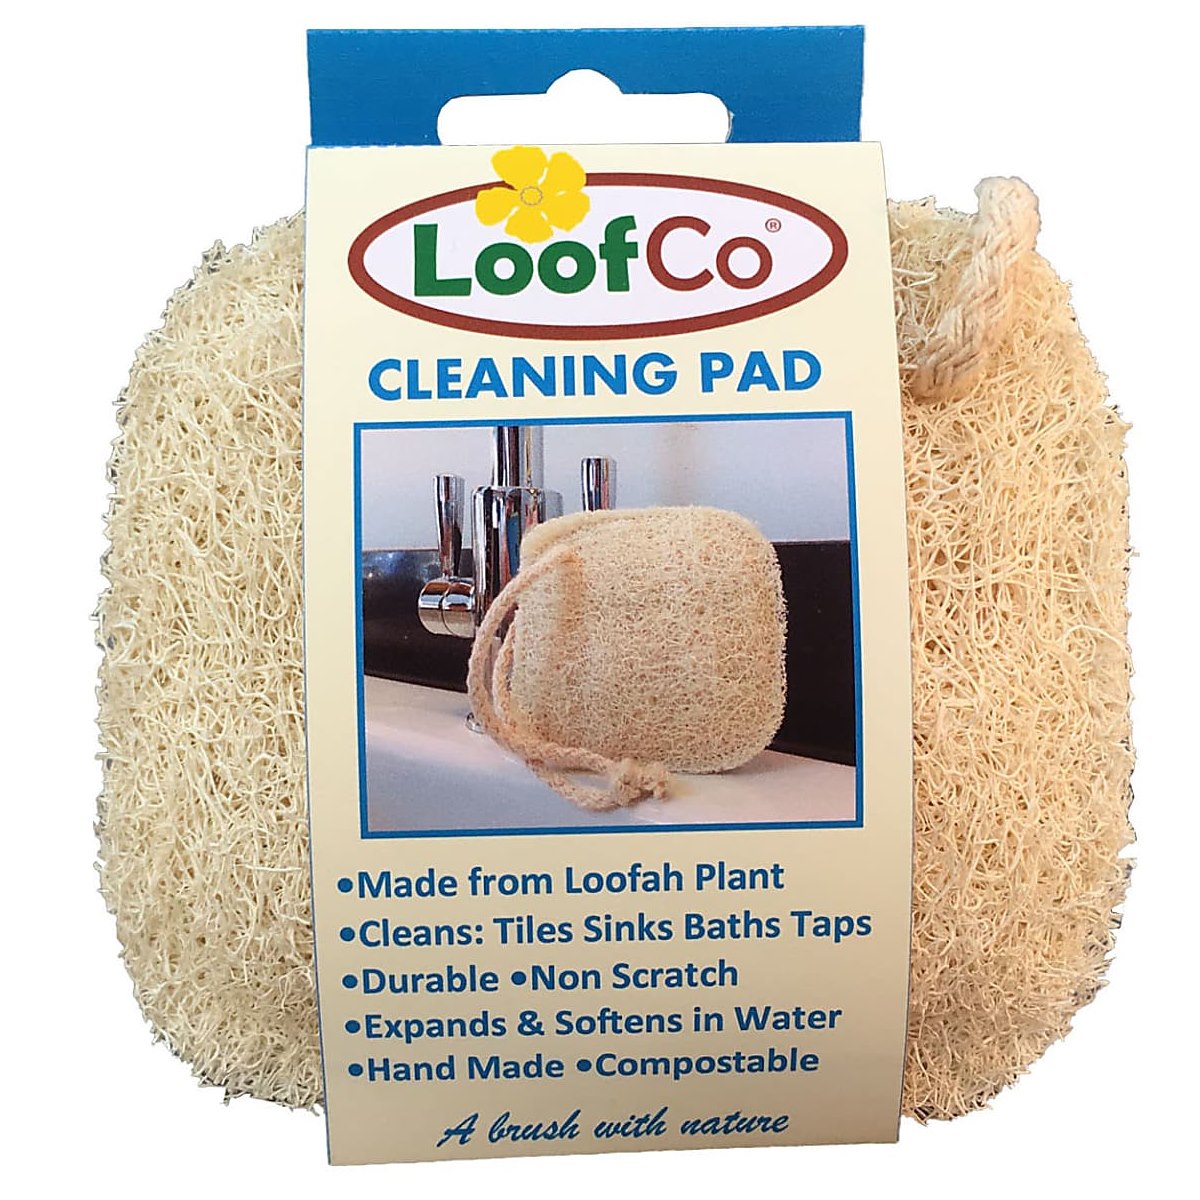 LoofCo Cleaning Pad